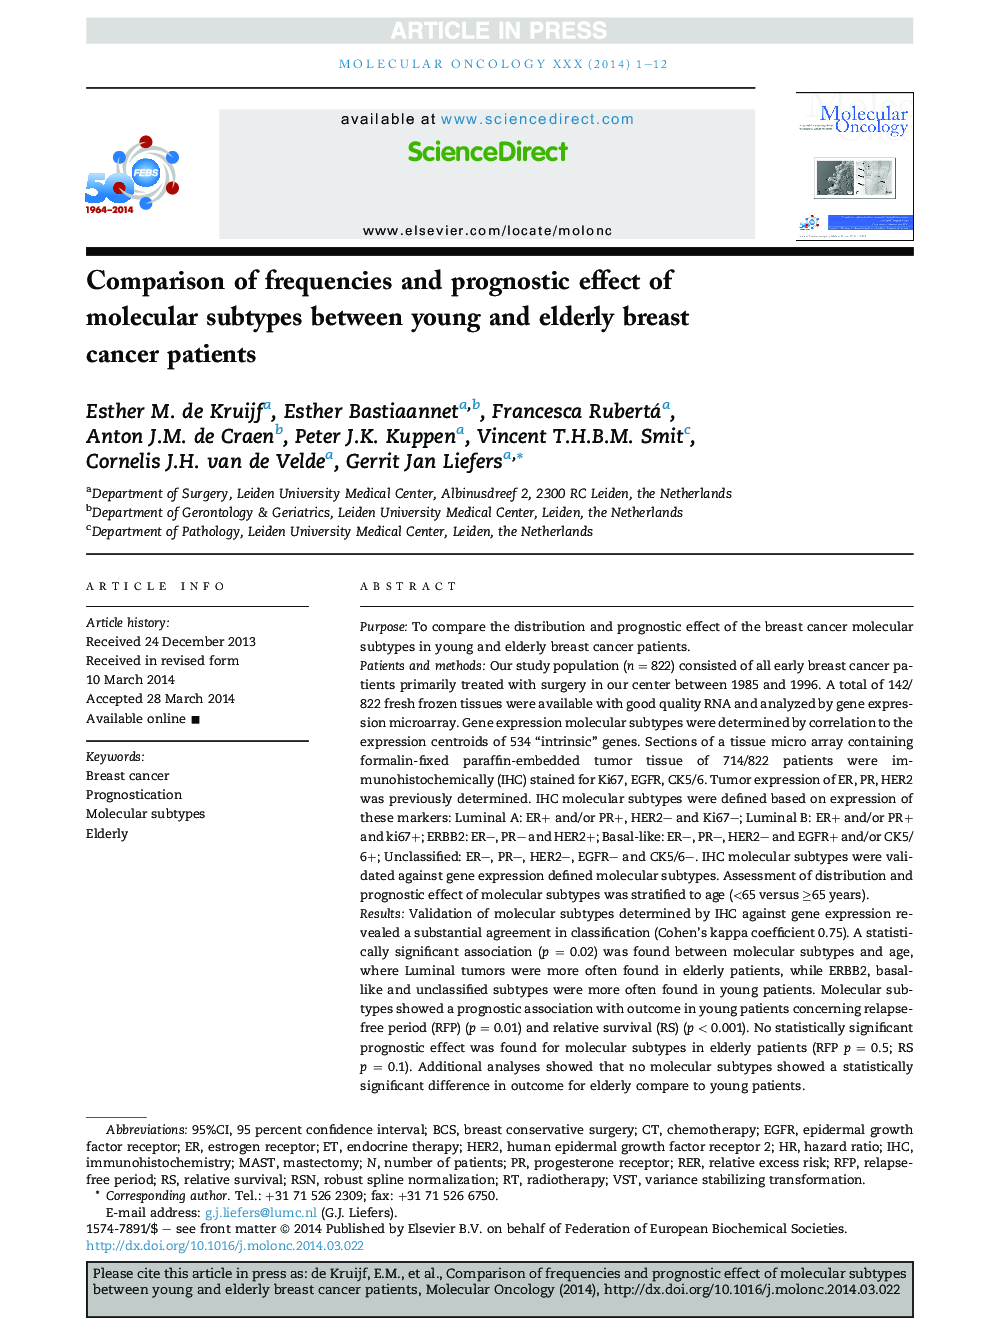 Comparison of frequencies and prognostic effect of molecular subtypes between young and elderly breast cancer patients